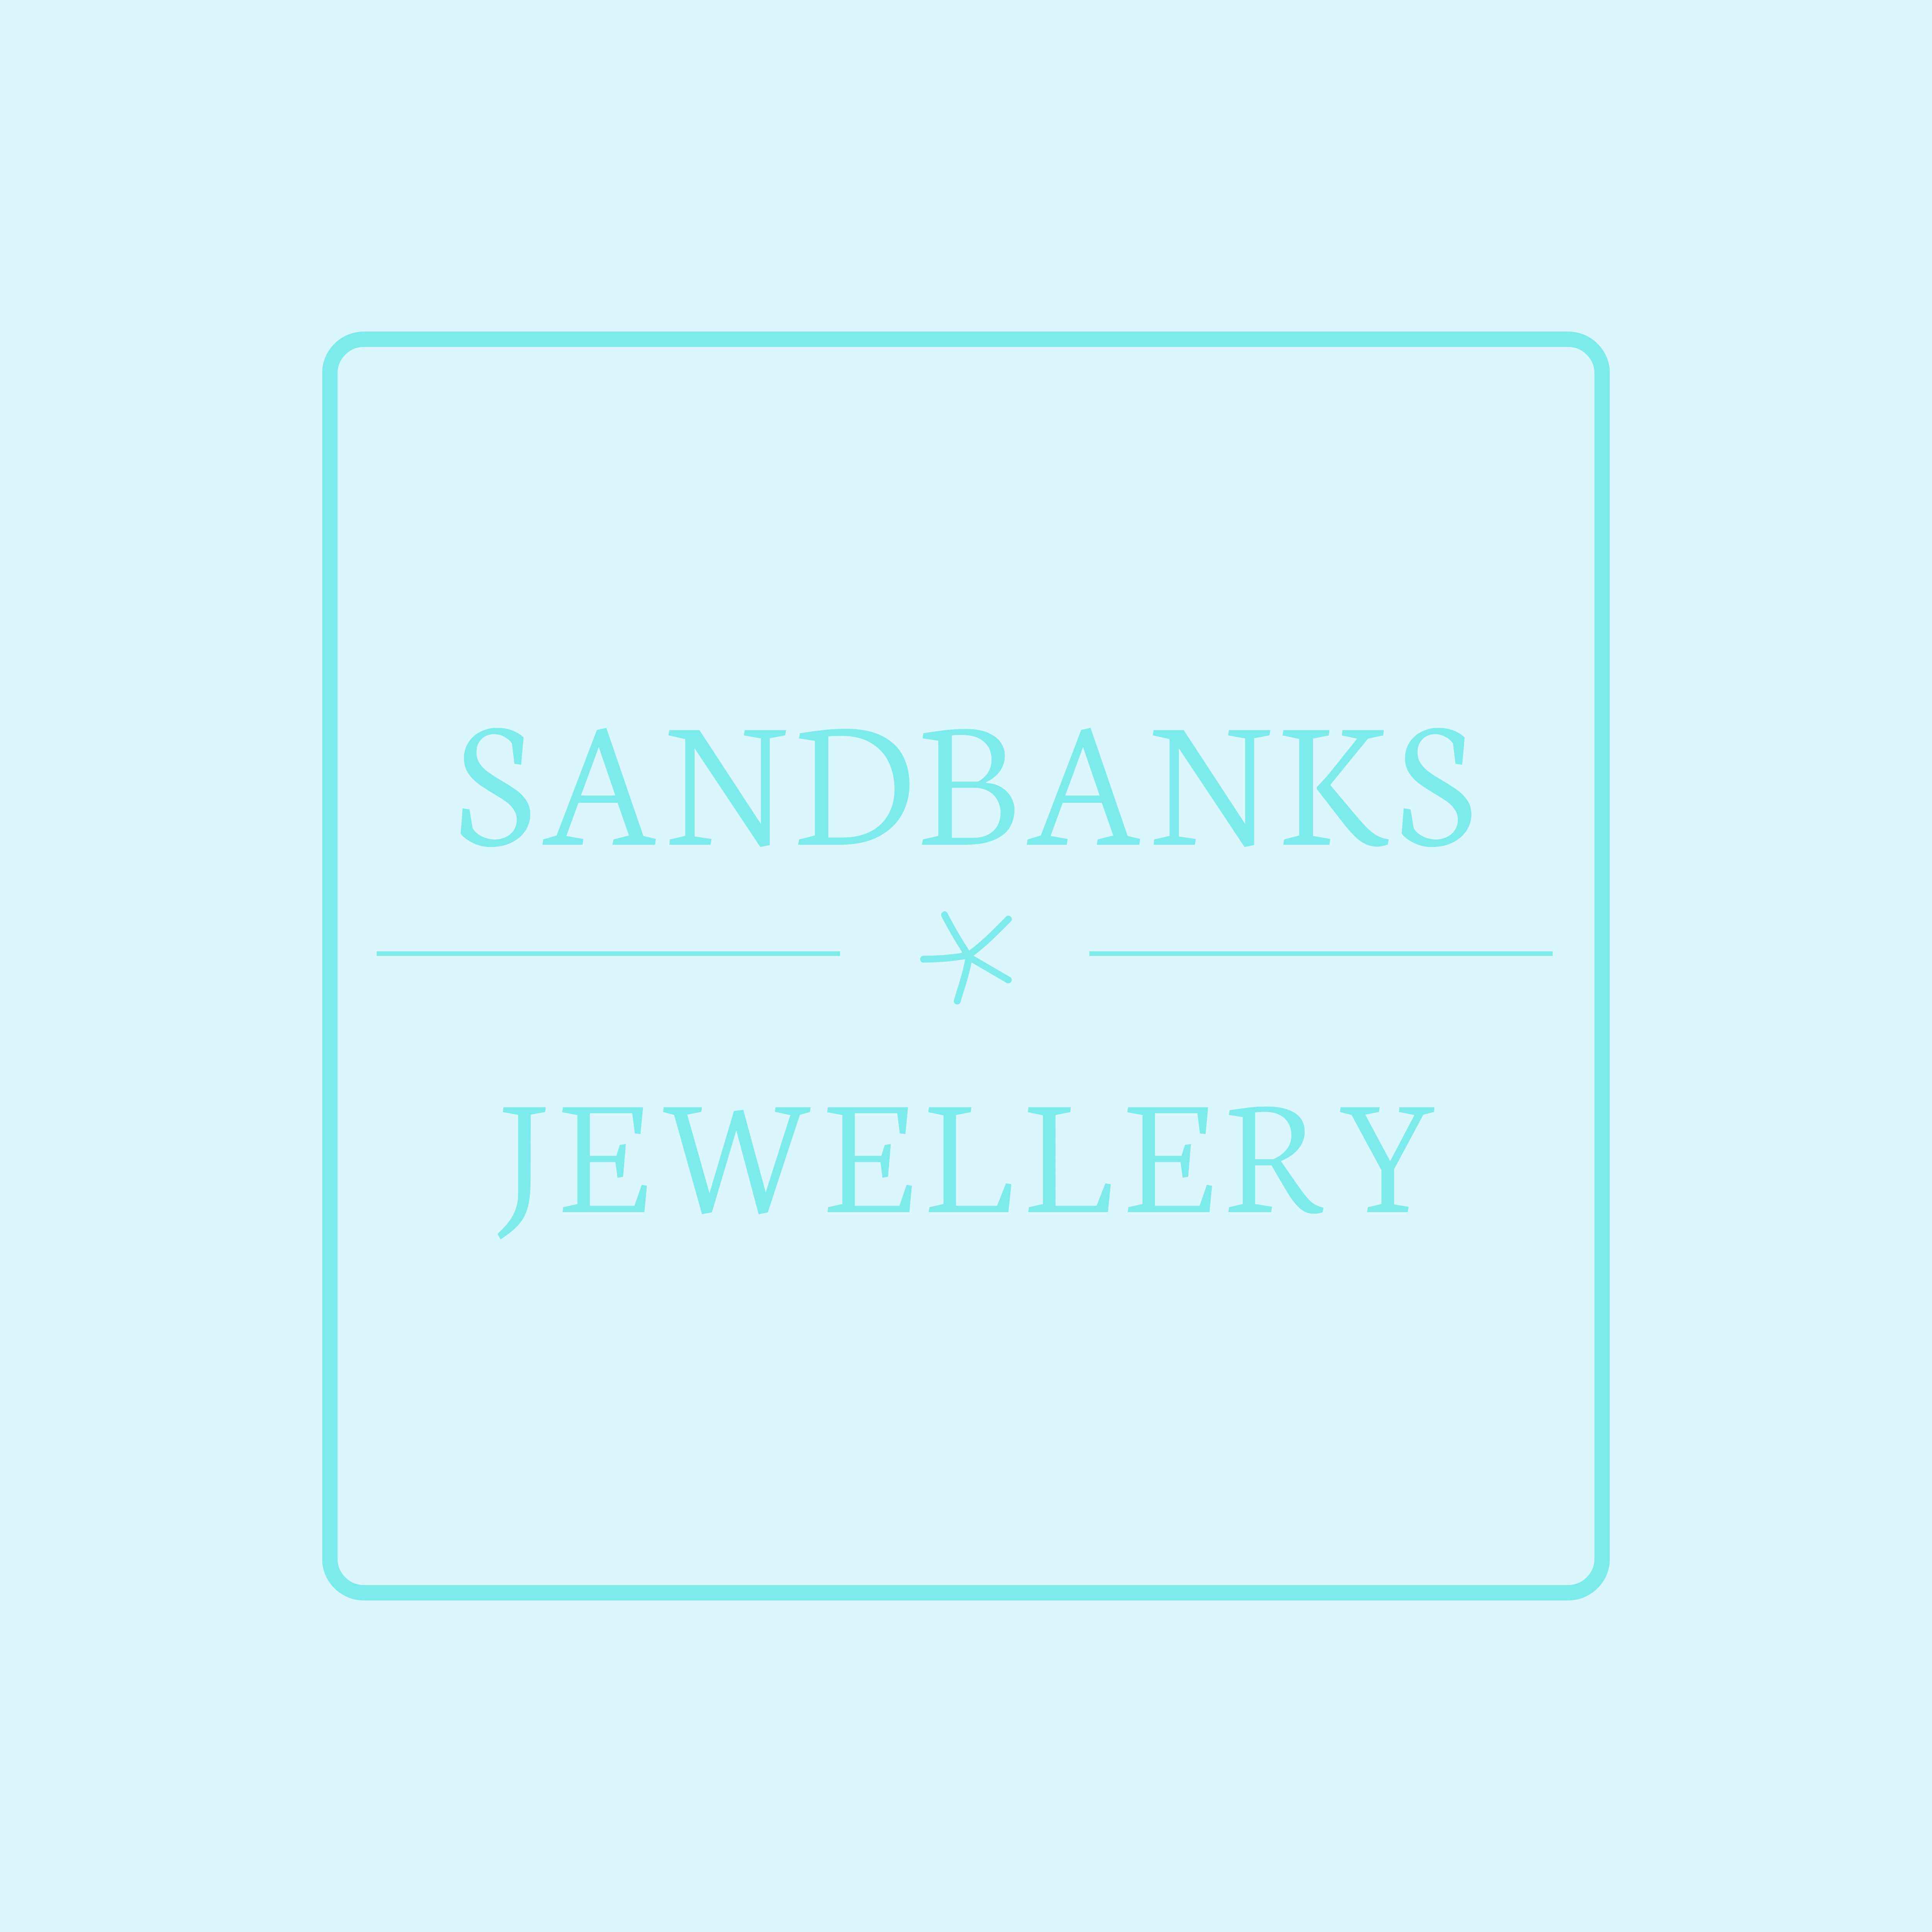 This shop is called SandbanksJewellery_REMOVED 